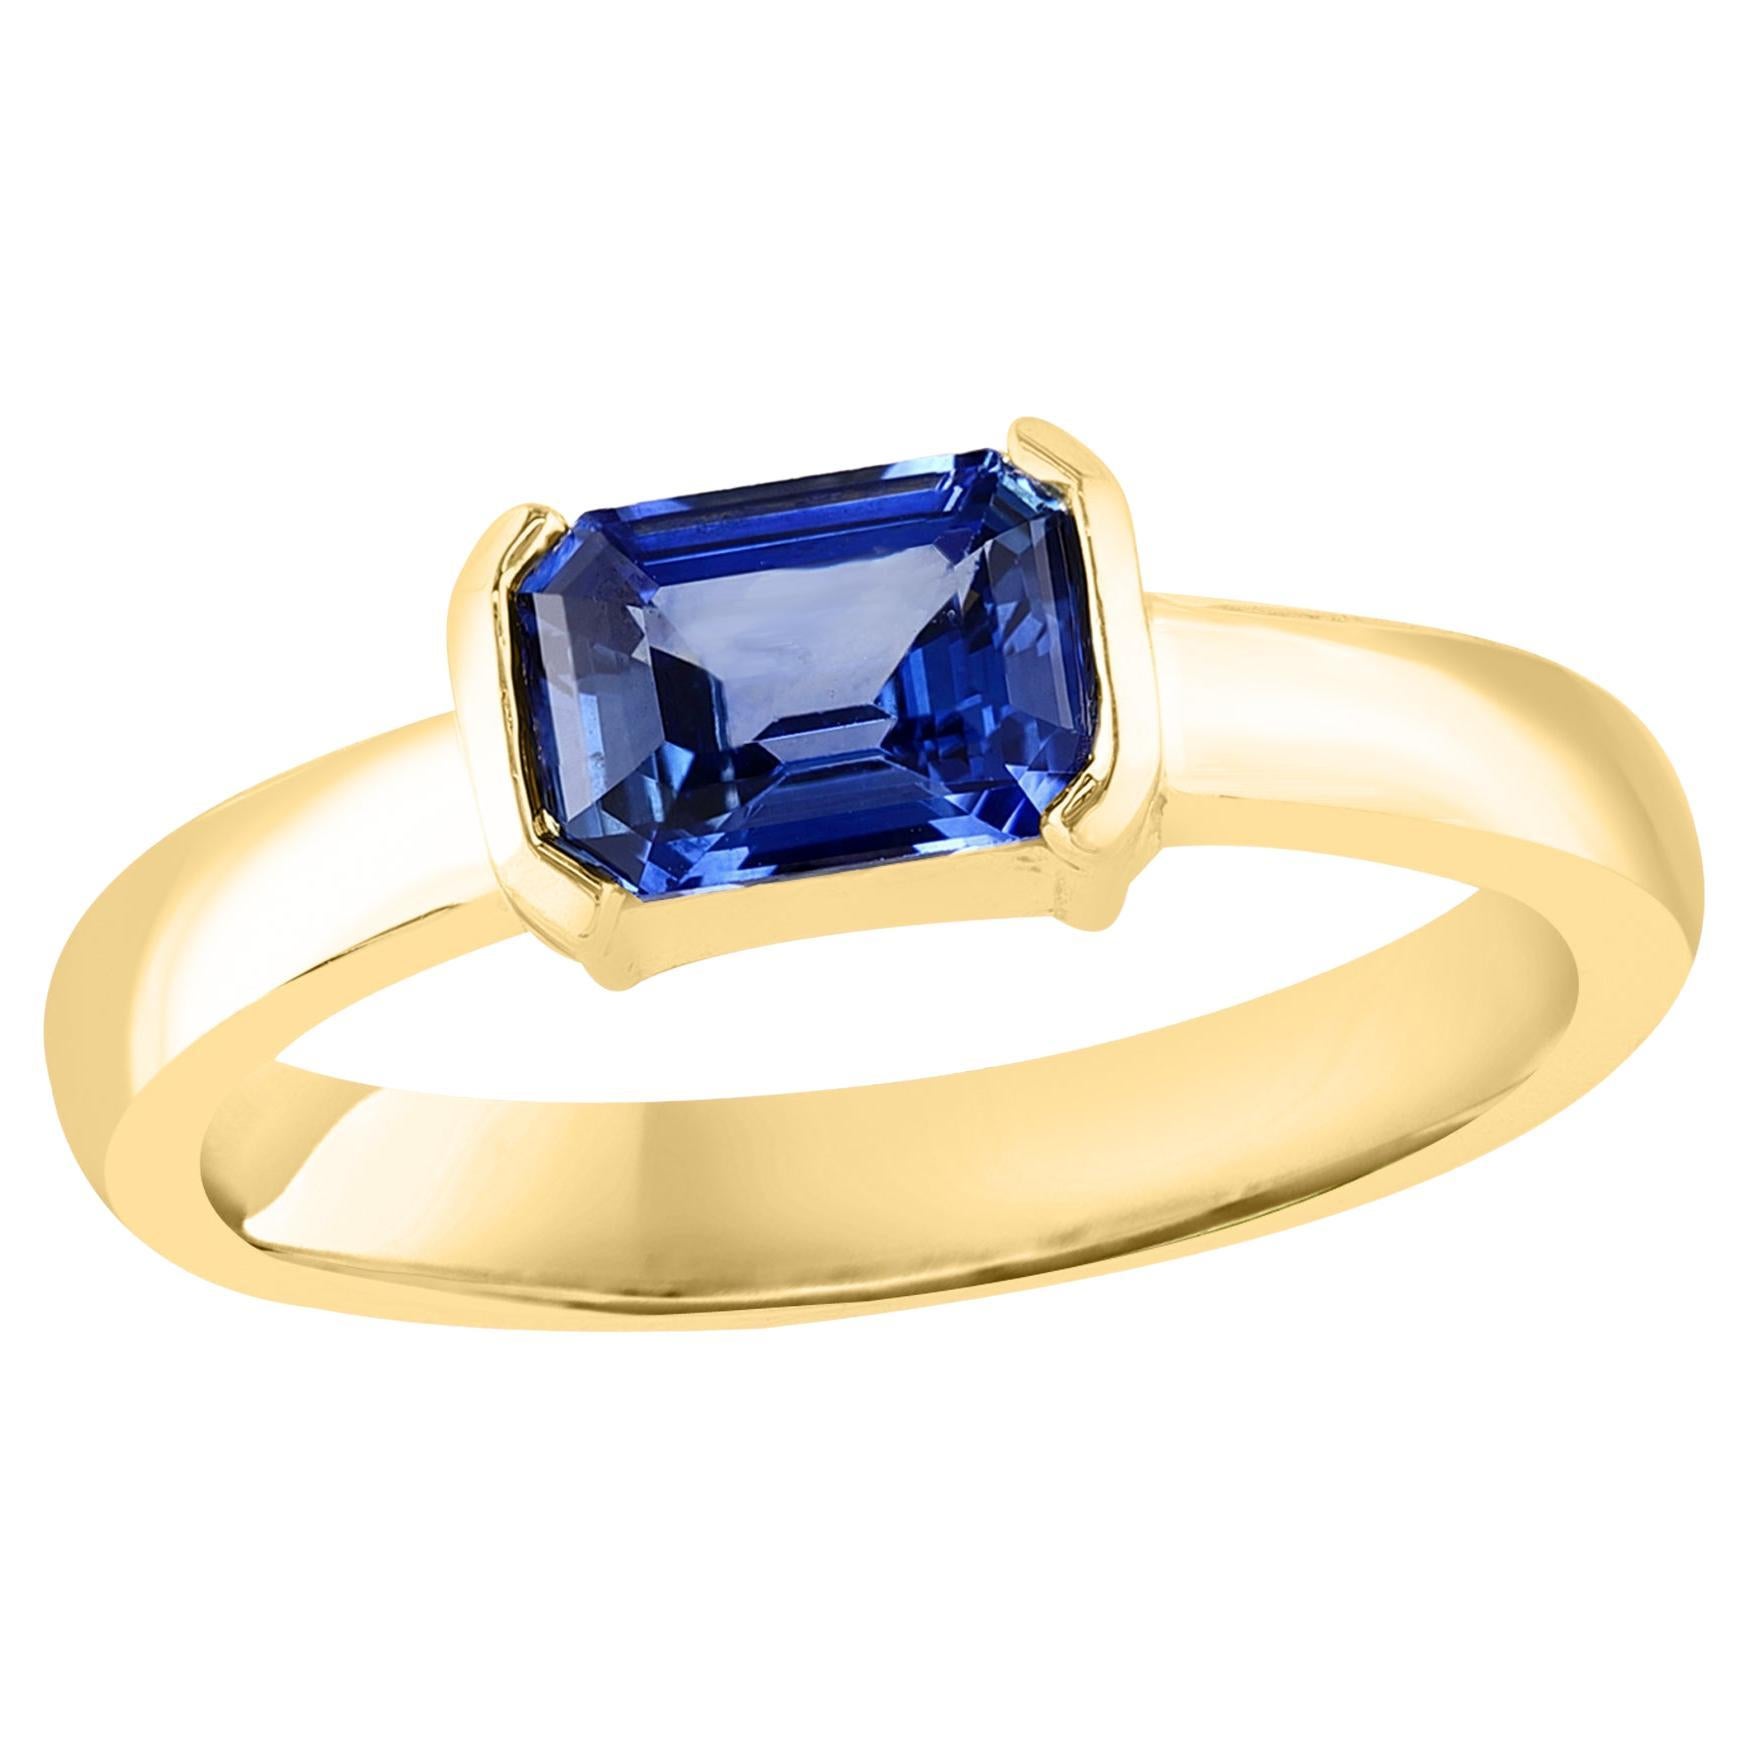 1.06 Carat Emerald Cut Blue Sapphire Band Ring in 14K Yellow Gold For Sale